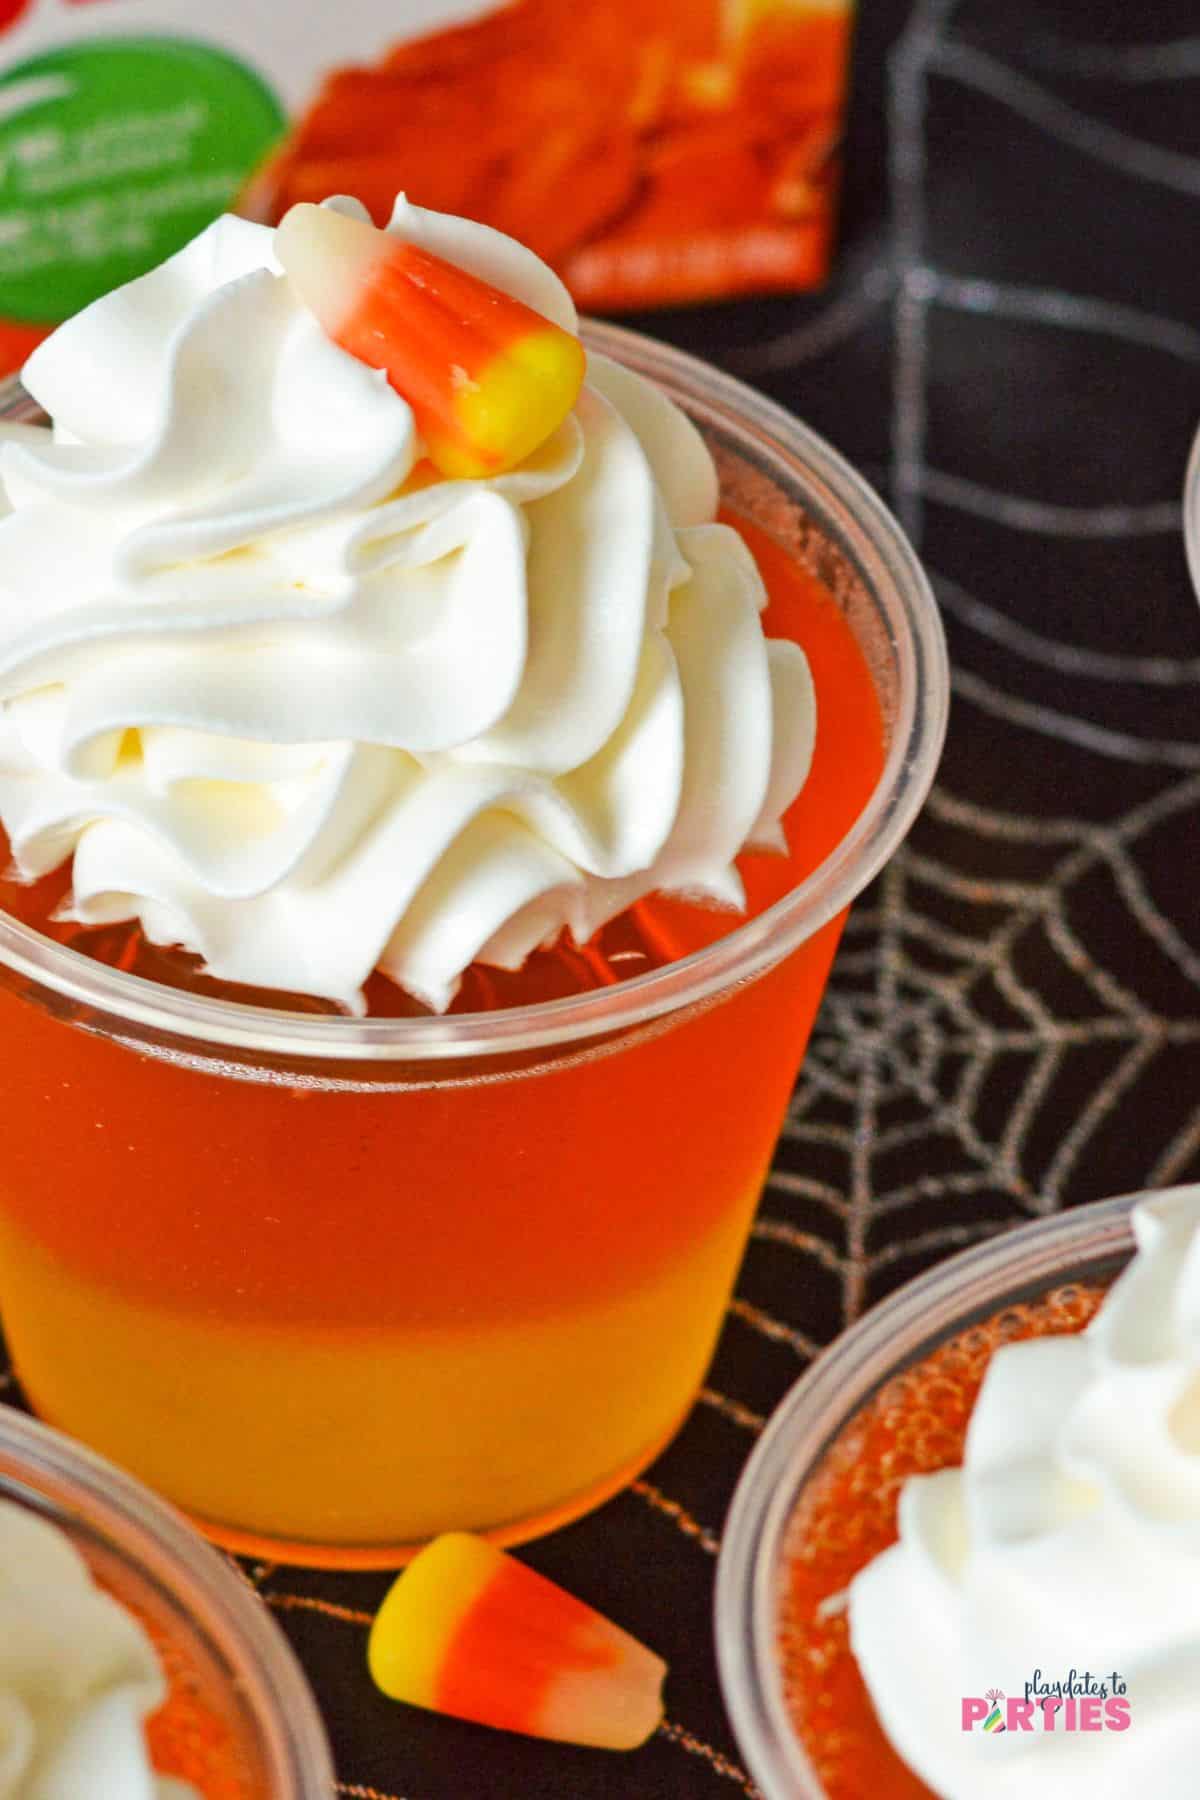 A plastic cup with layers of pineapple and orange jello with whipped cream on top.